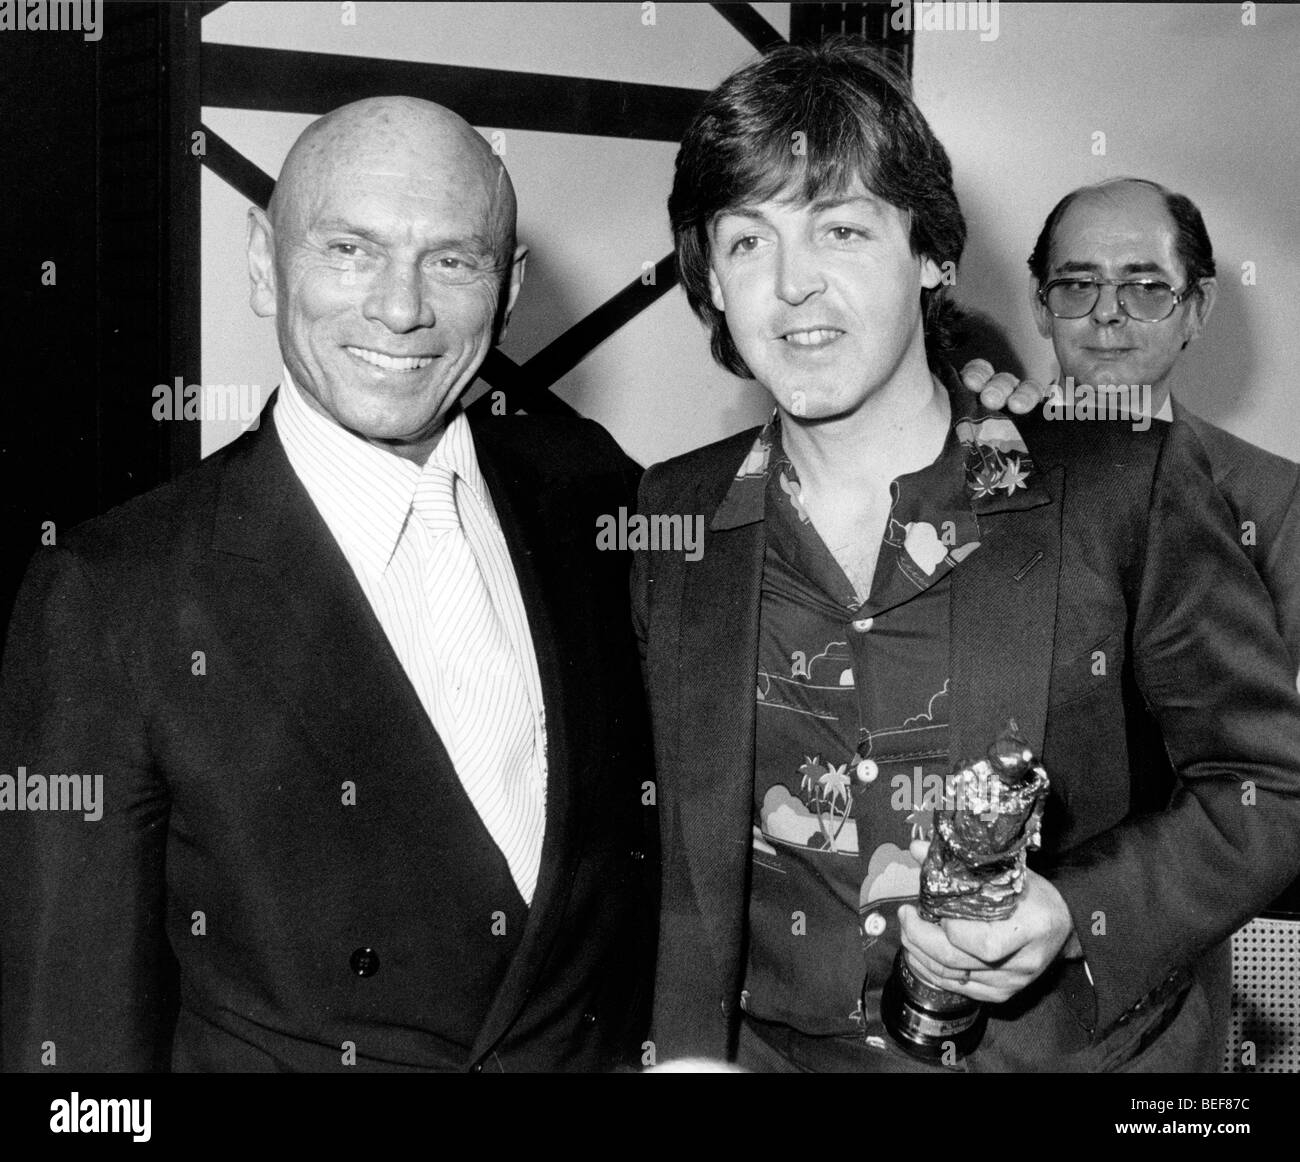 Actor Yul Brynner presents Paul McCartney with award Stock Photo